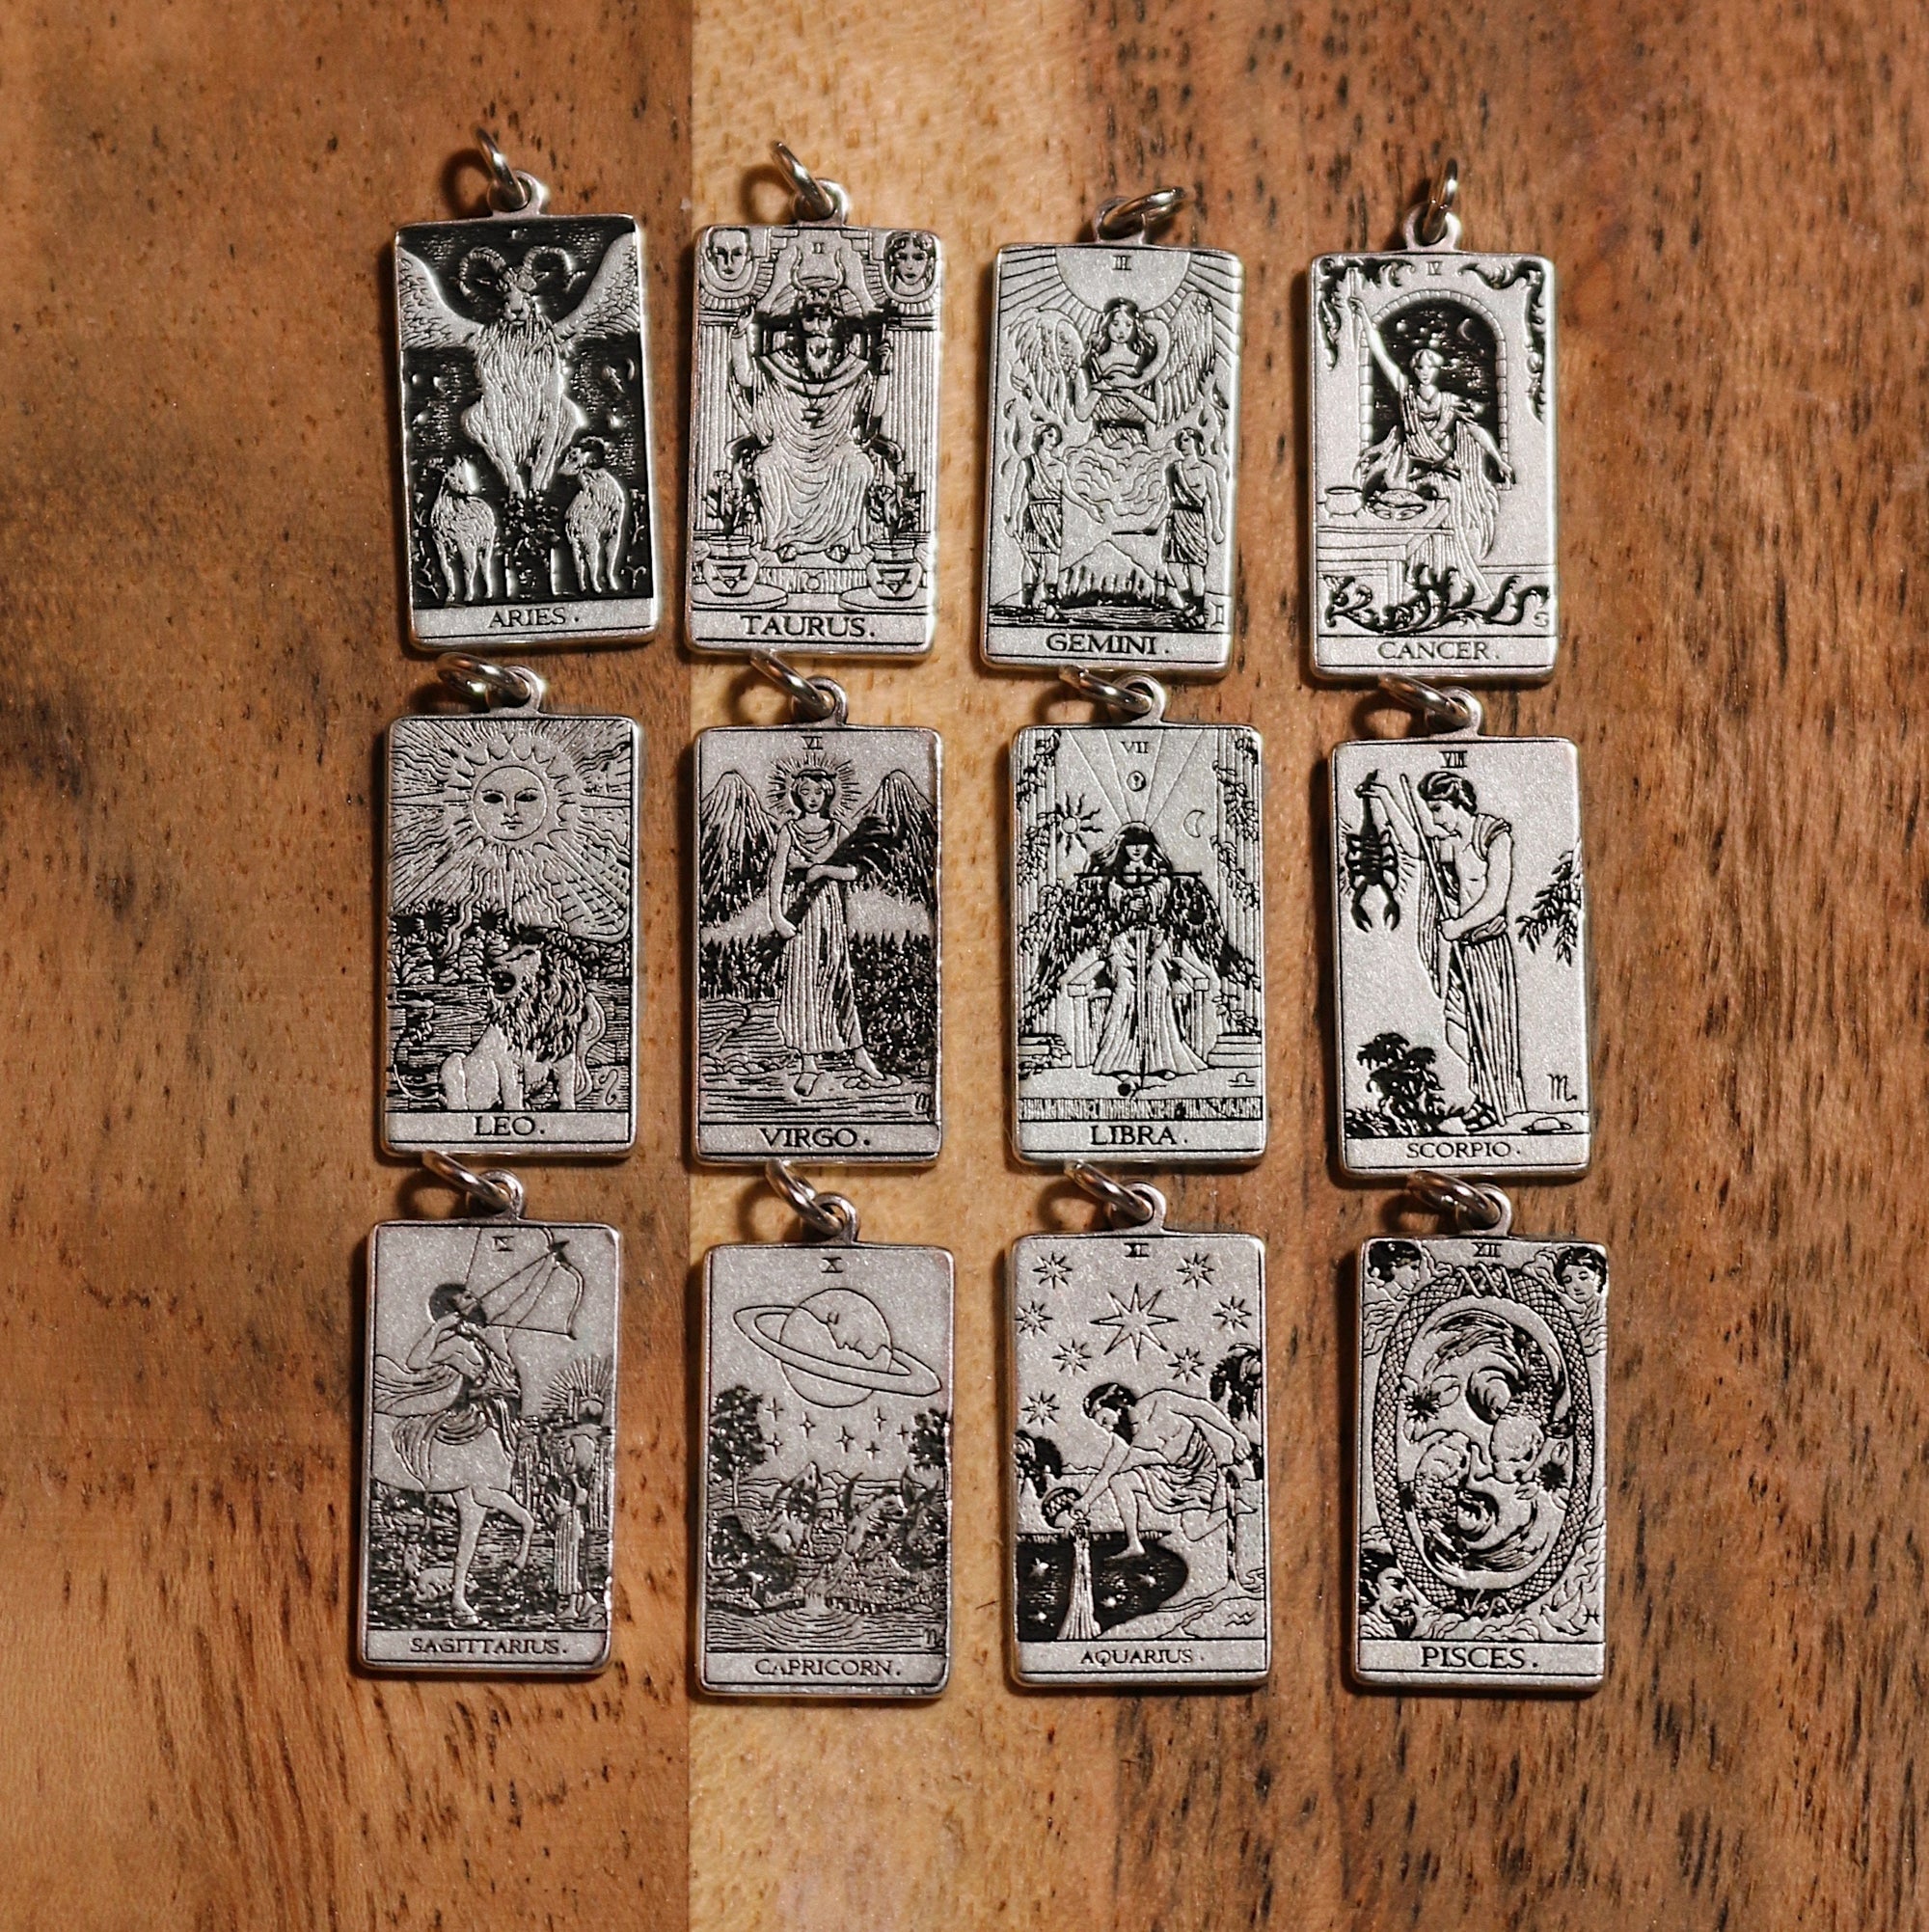 Aquarius The Star Tarot Card Inspired Zodiac Necklace - Sterling Silver